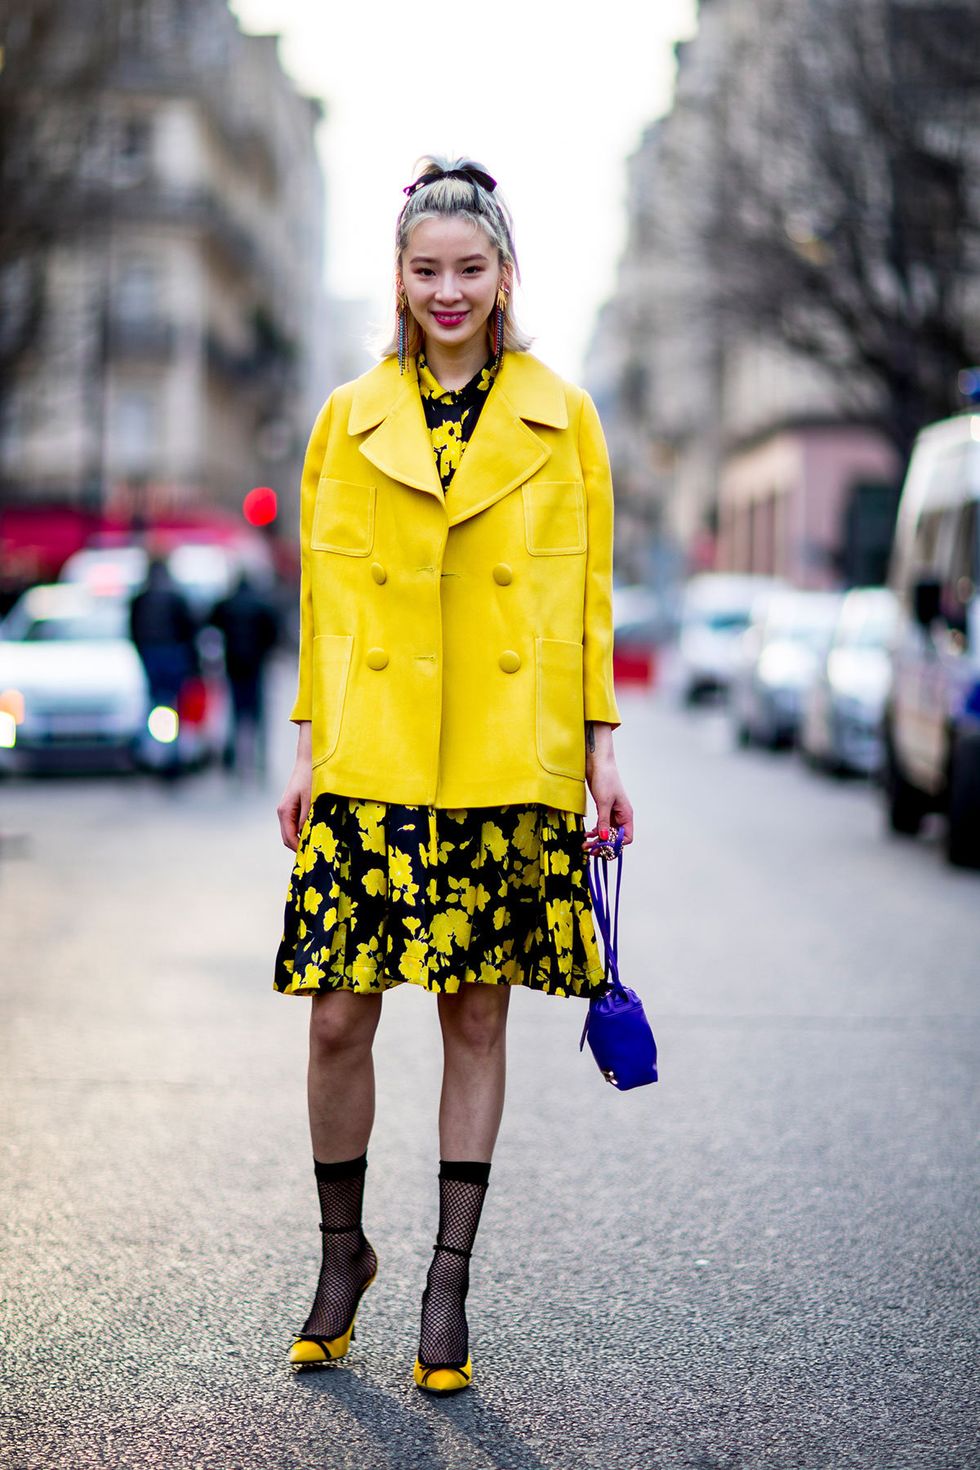 Clothing, Yellow, Sleeve, Collar, Outerwear, Street, Style, Street fashion, Bag, Pattern, 